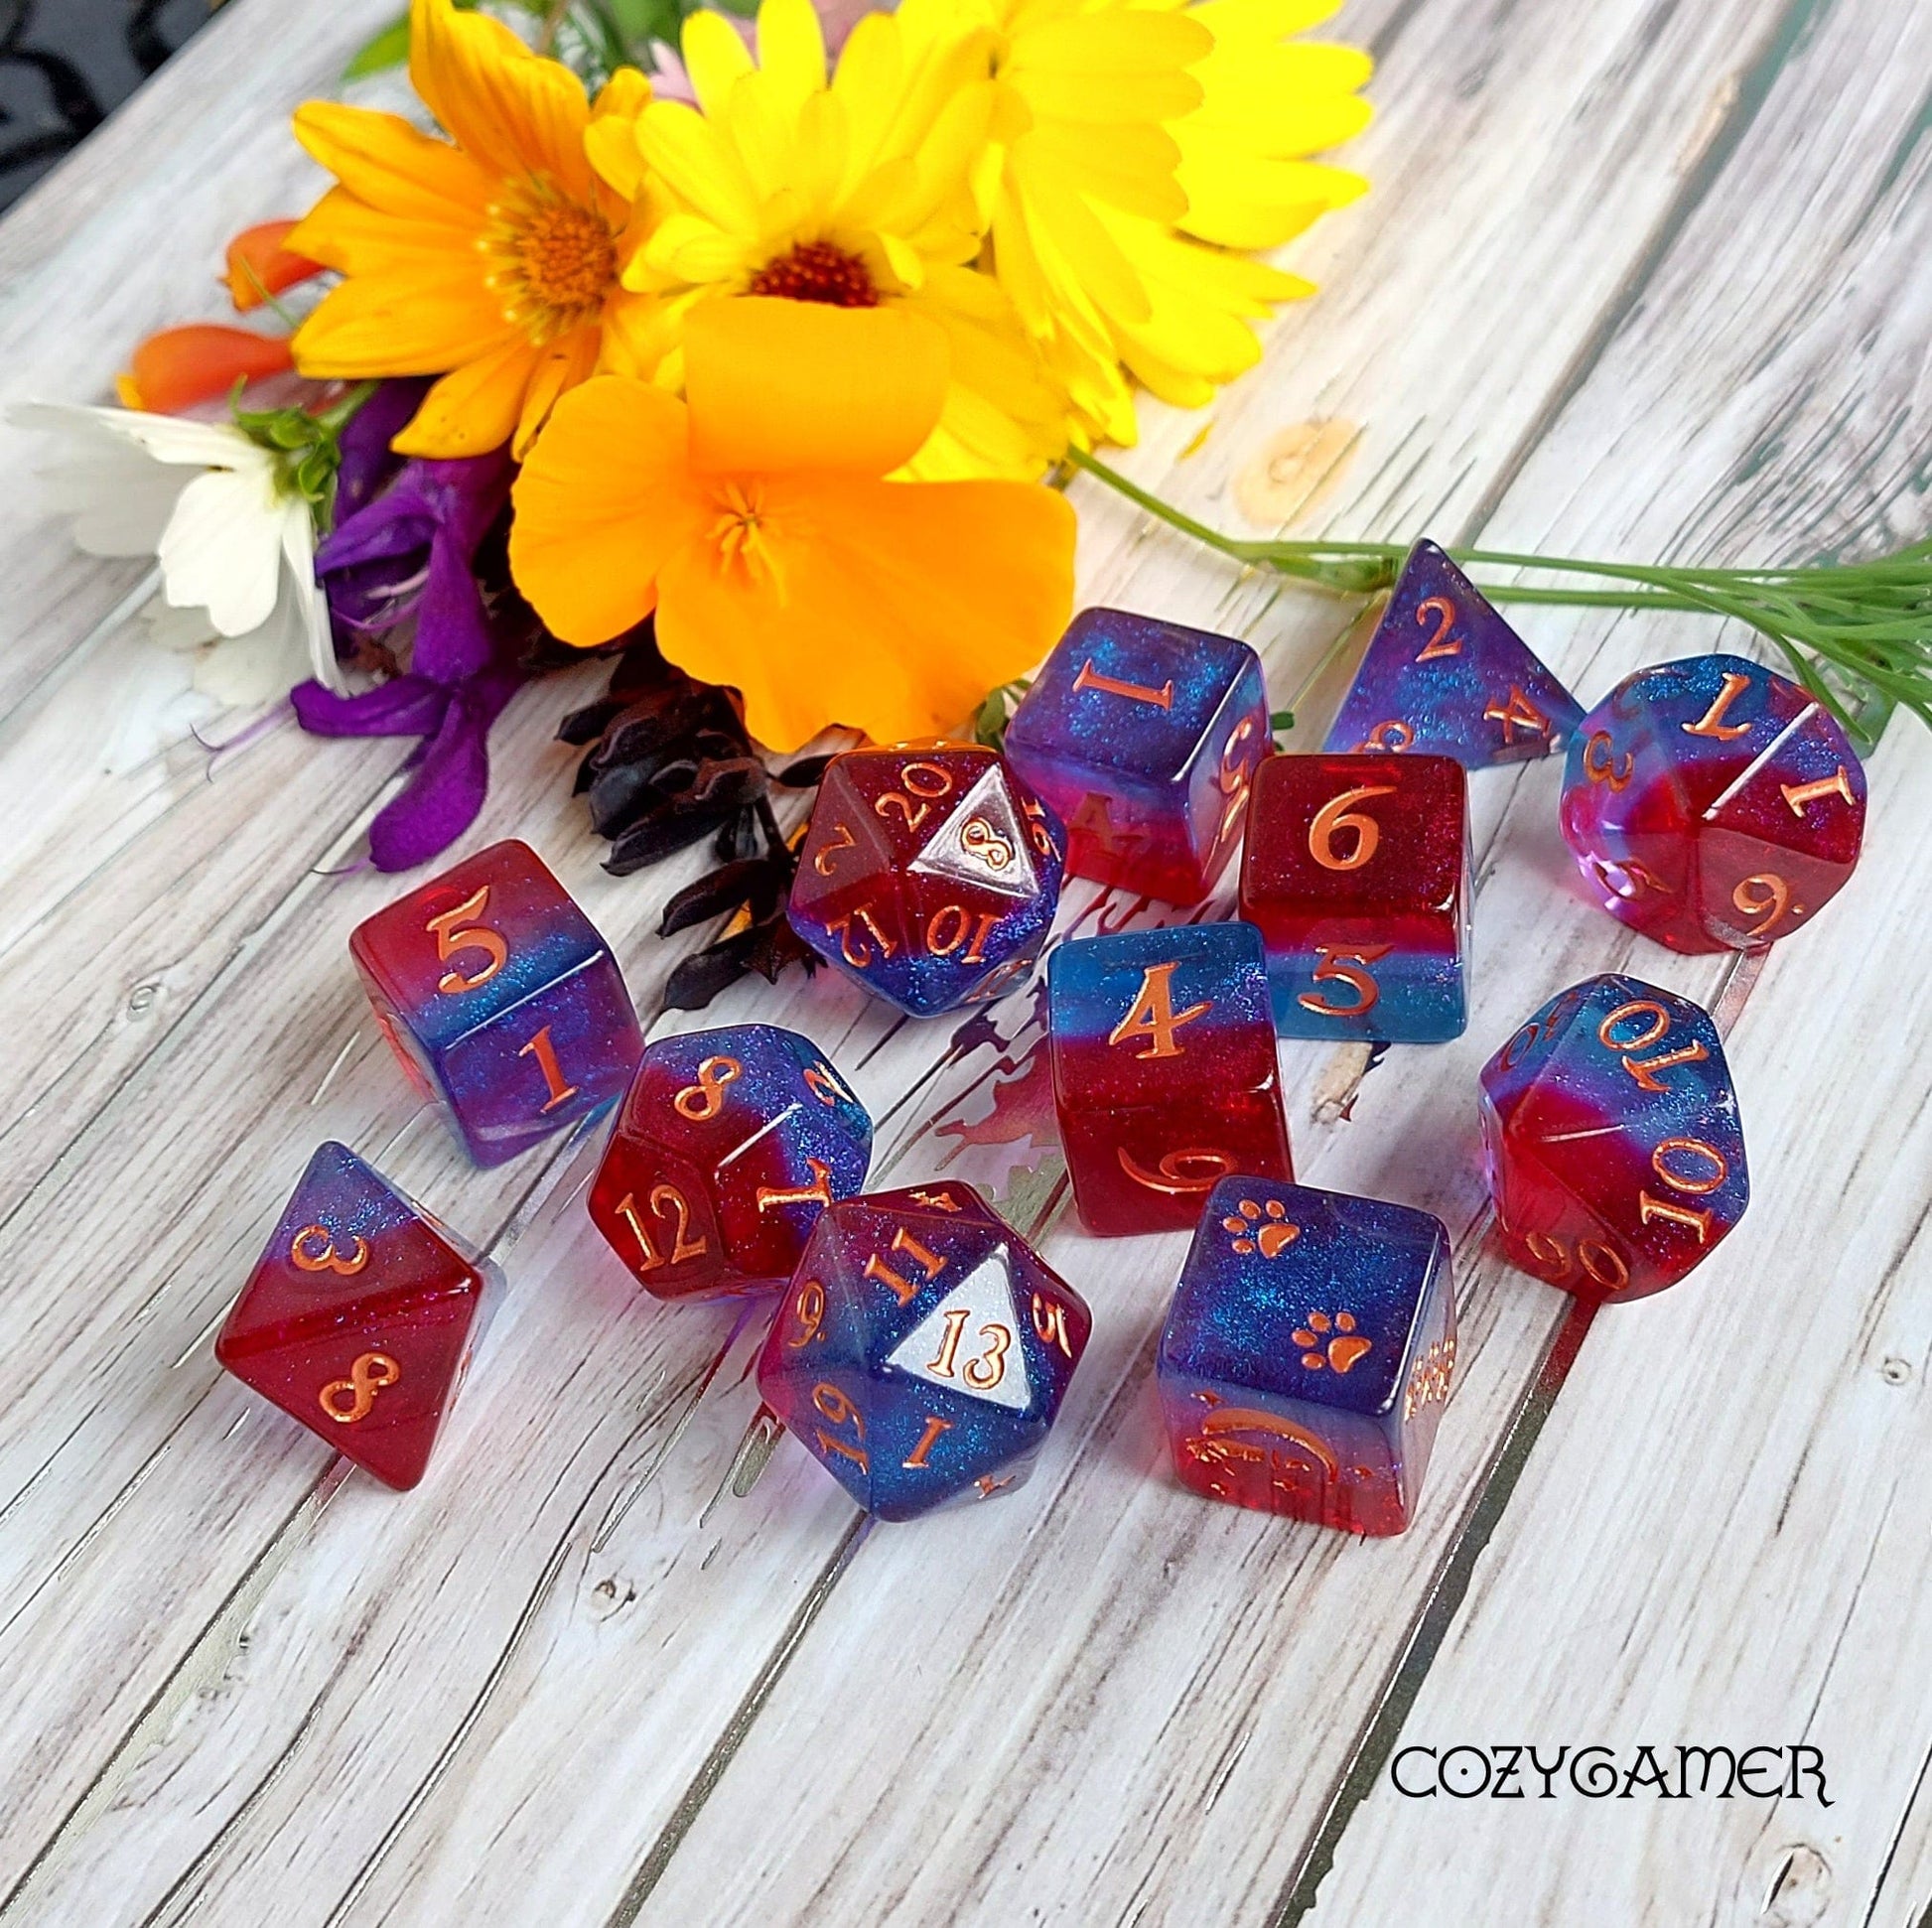 Tiefling Boudoir Dice Set, Ruby, Amethyst, and Sapphire Shimmering Layers DND Dice. 12 Piece, 8 Piece, D10, and D6 Sets